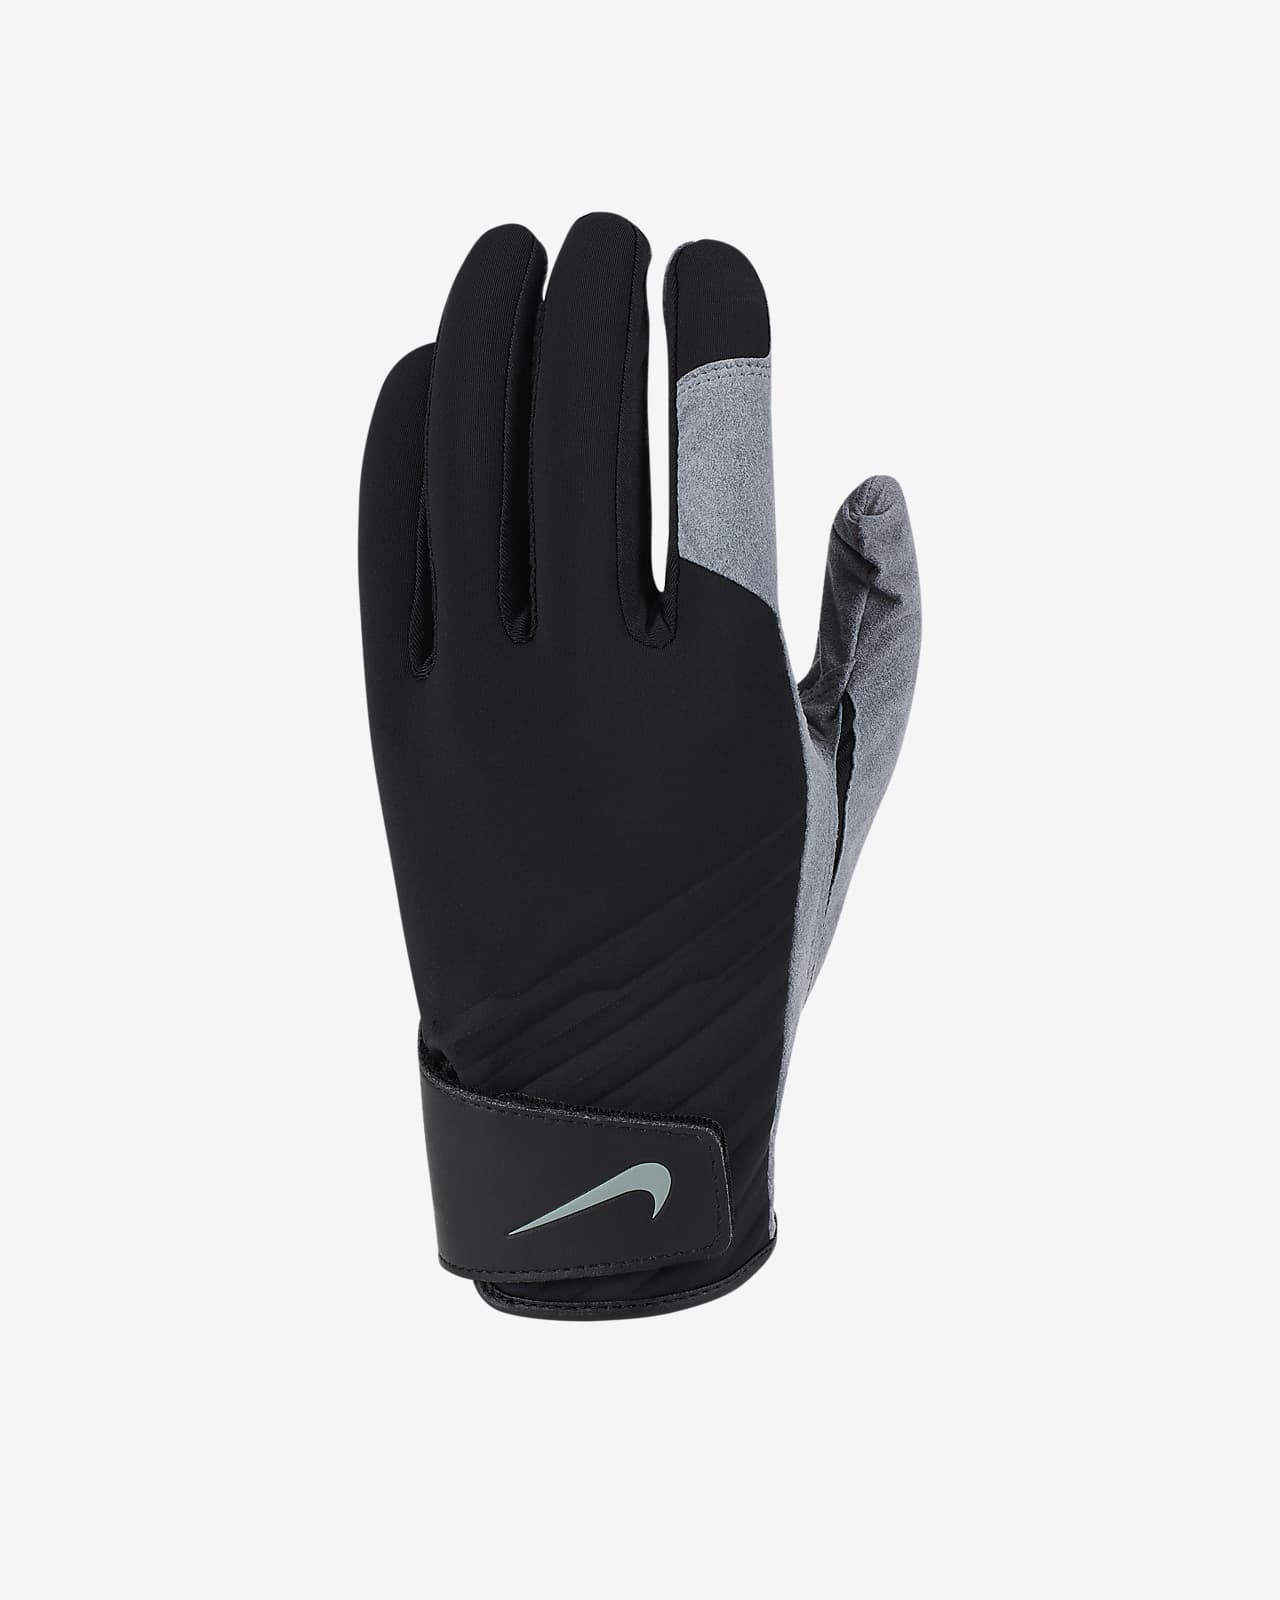 Womens Accessories Gloves New Look Synthetic Long Gloves in Black 